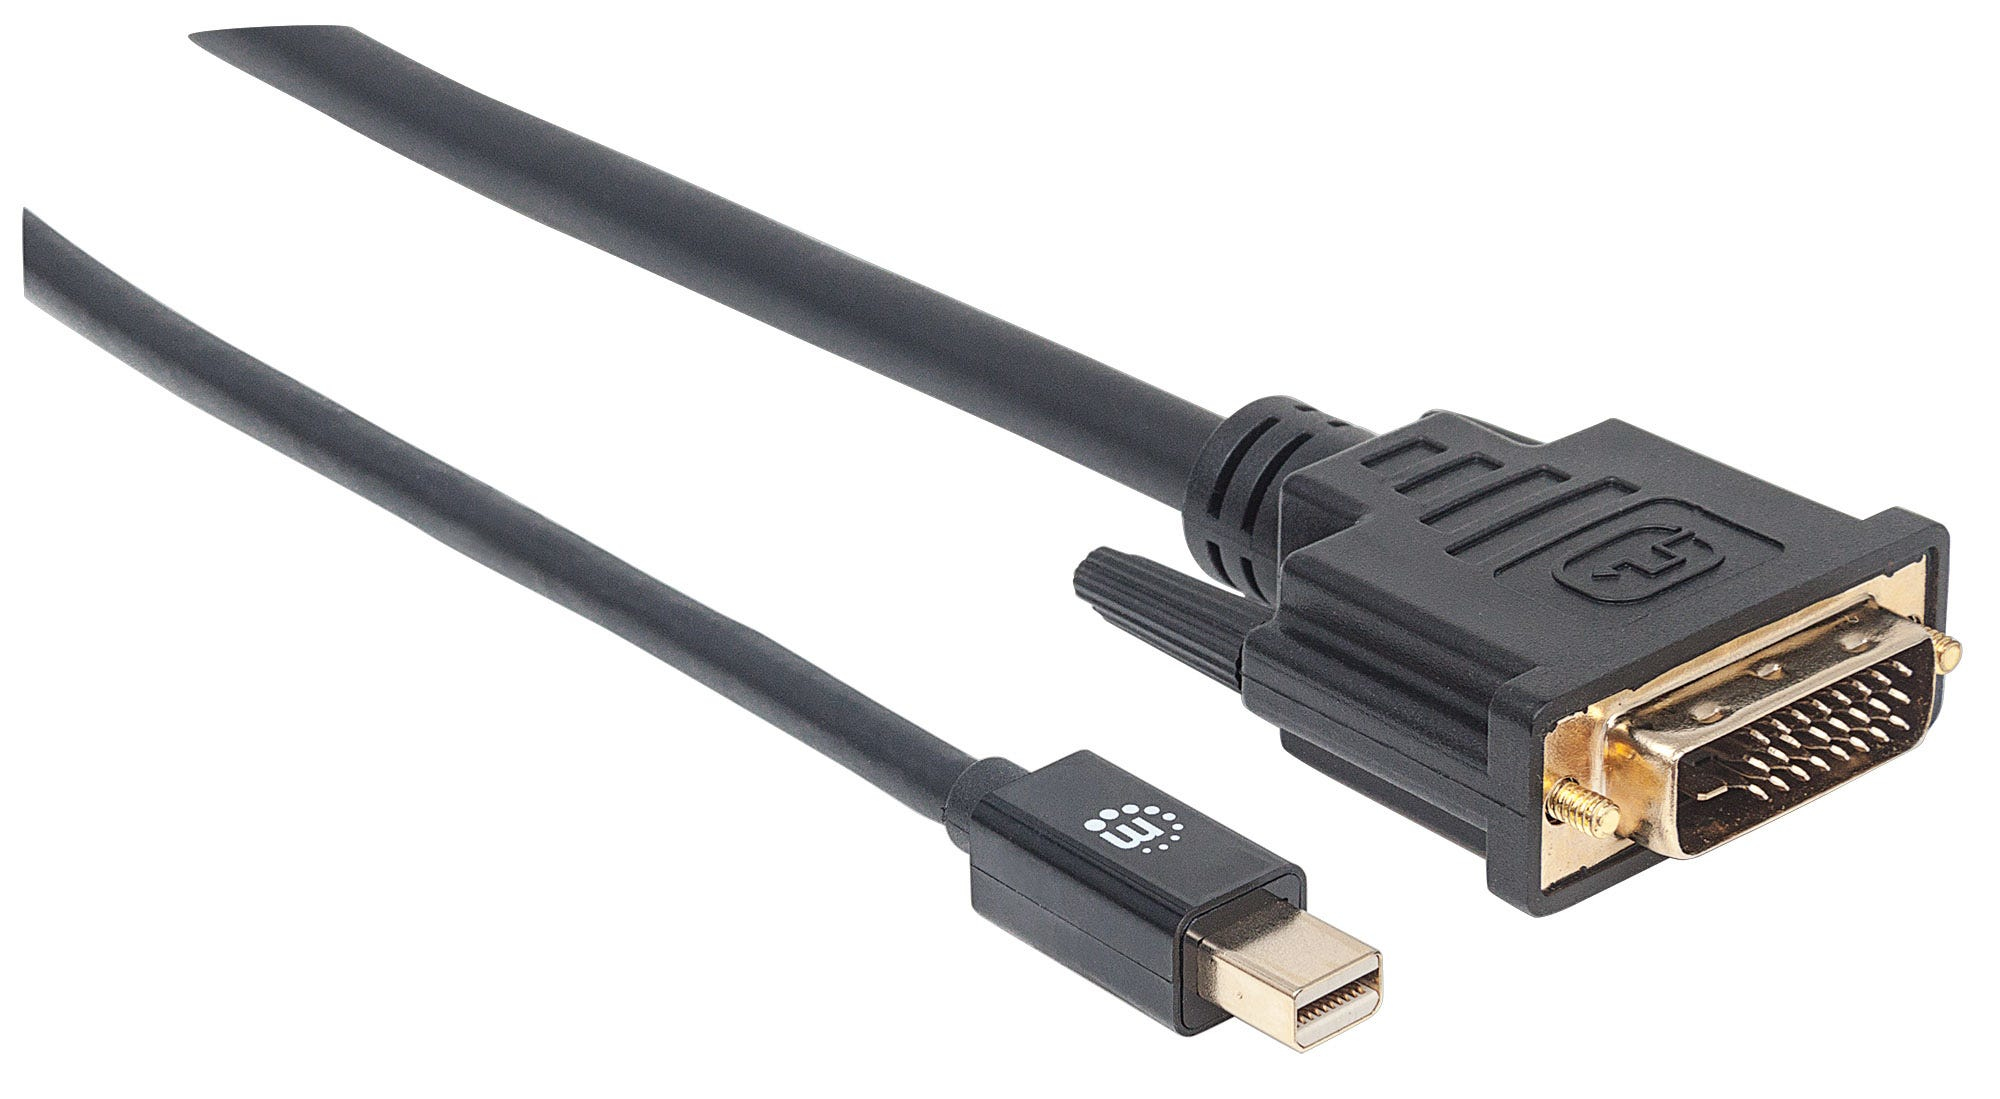 Manhattan Mini DisplayPort 1.2a to DVI-D 24+1 Cable (Clearance Pricing), 1080p@60Hz, 1.8m, Male to Male, Compatible with DVD-D, Black, Lifetime Warranty, Polybag